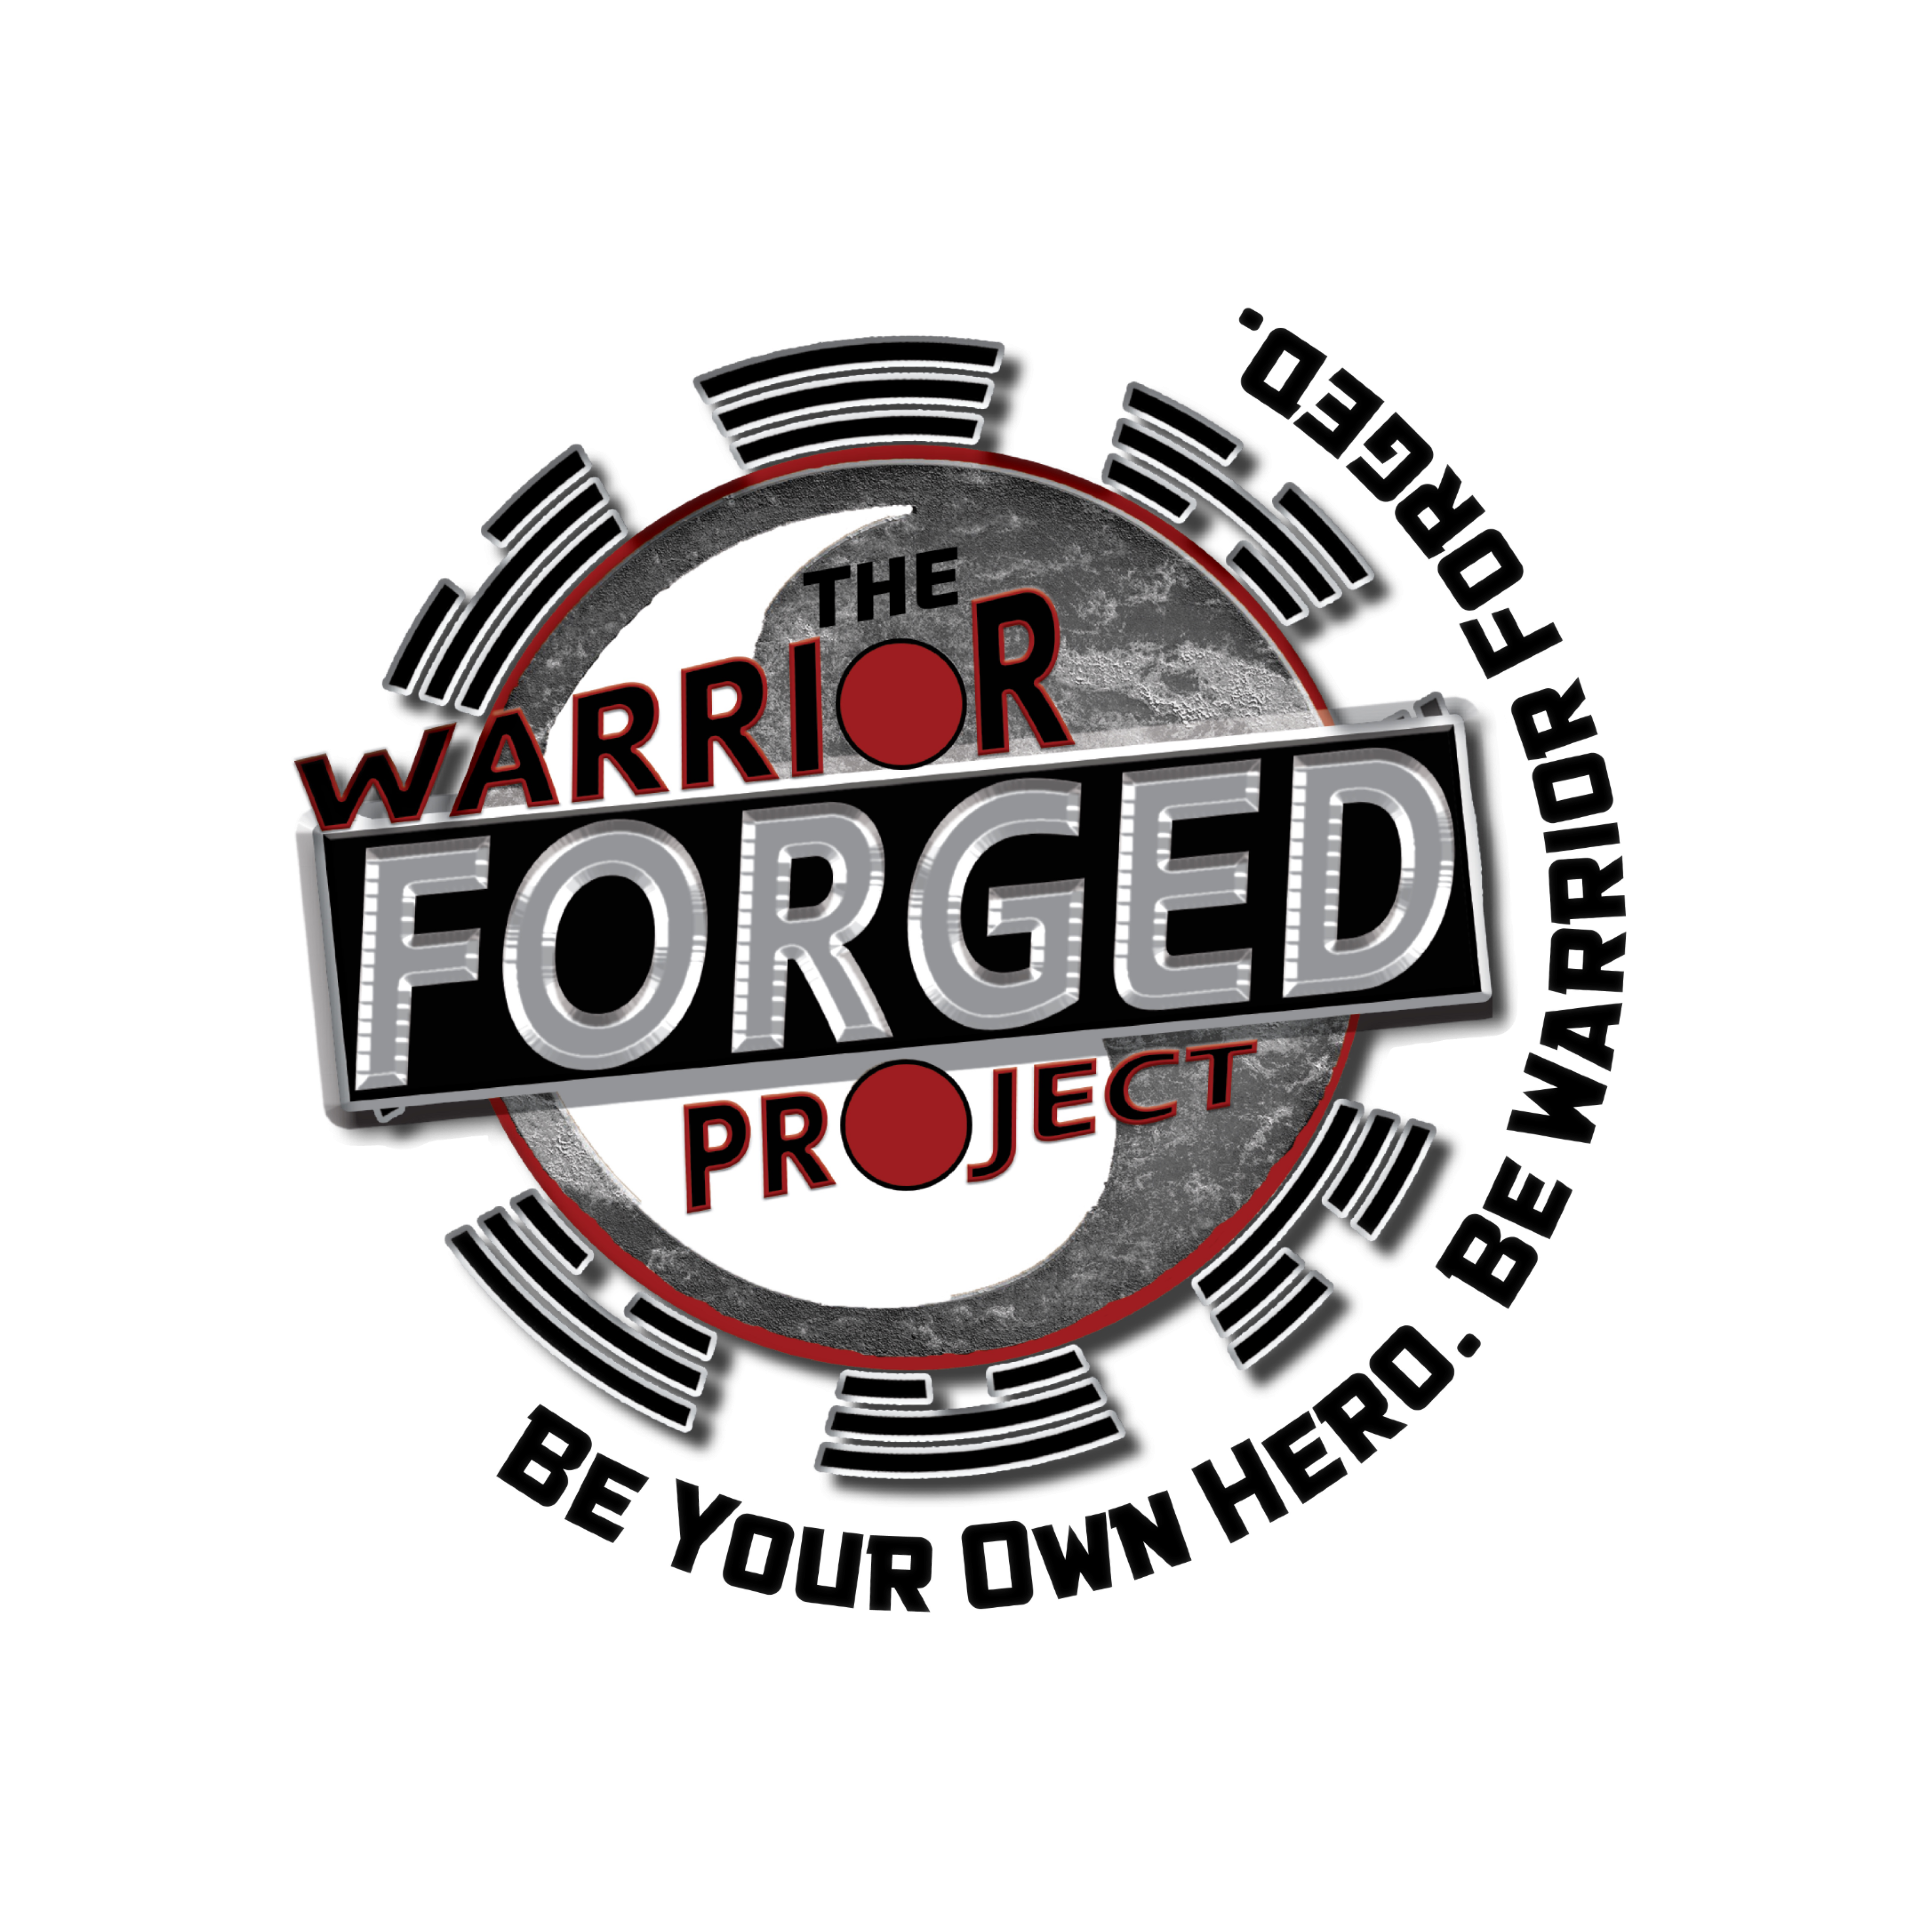 The Warrior Forged Project